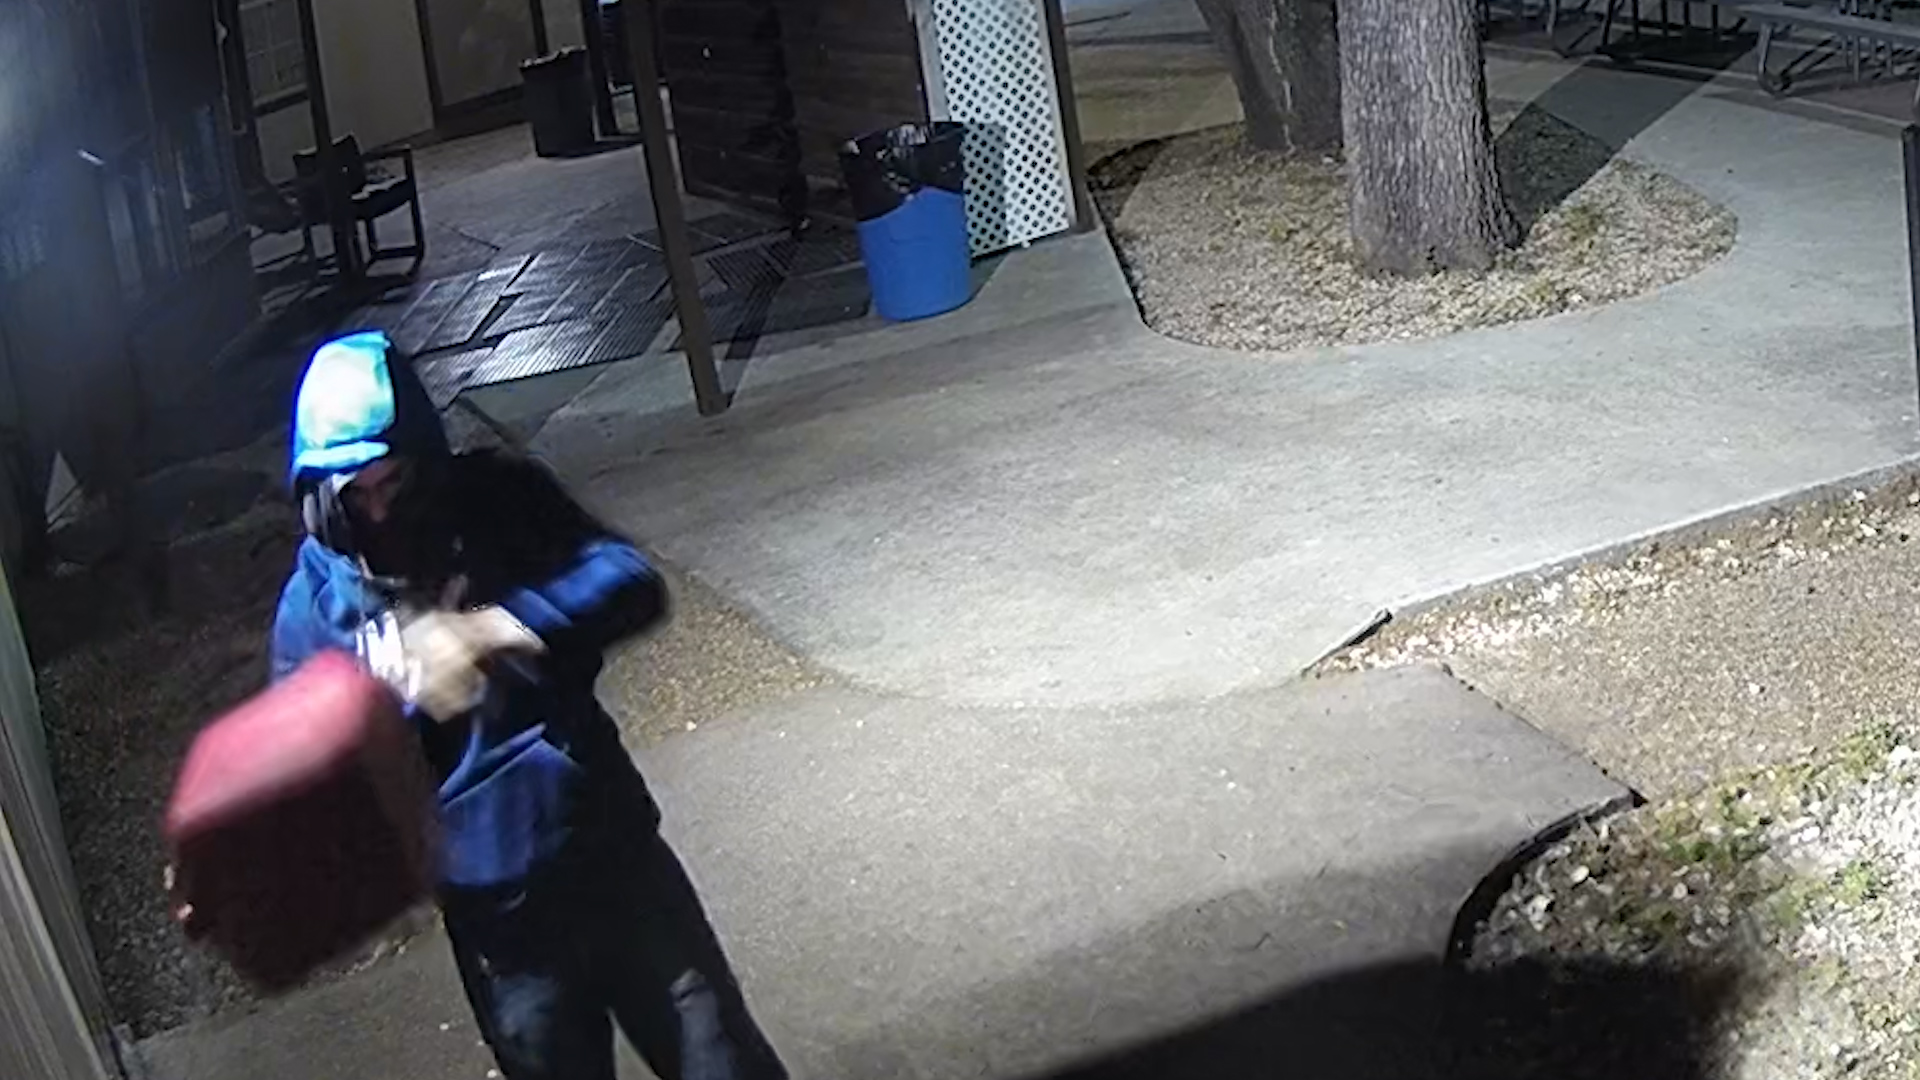 PHOTO: Police released images of a suspect appearing to attempt arson at the North Austin Muslim Center on April 23, 2019, in Austin, Texas, captured on security video.